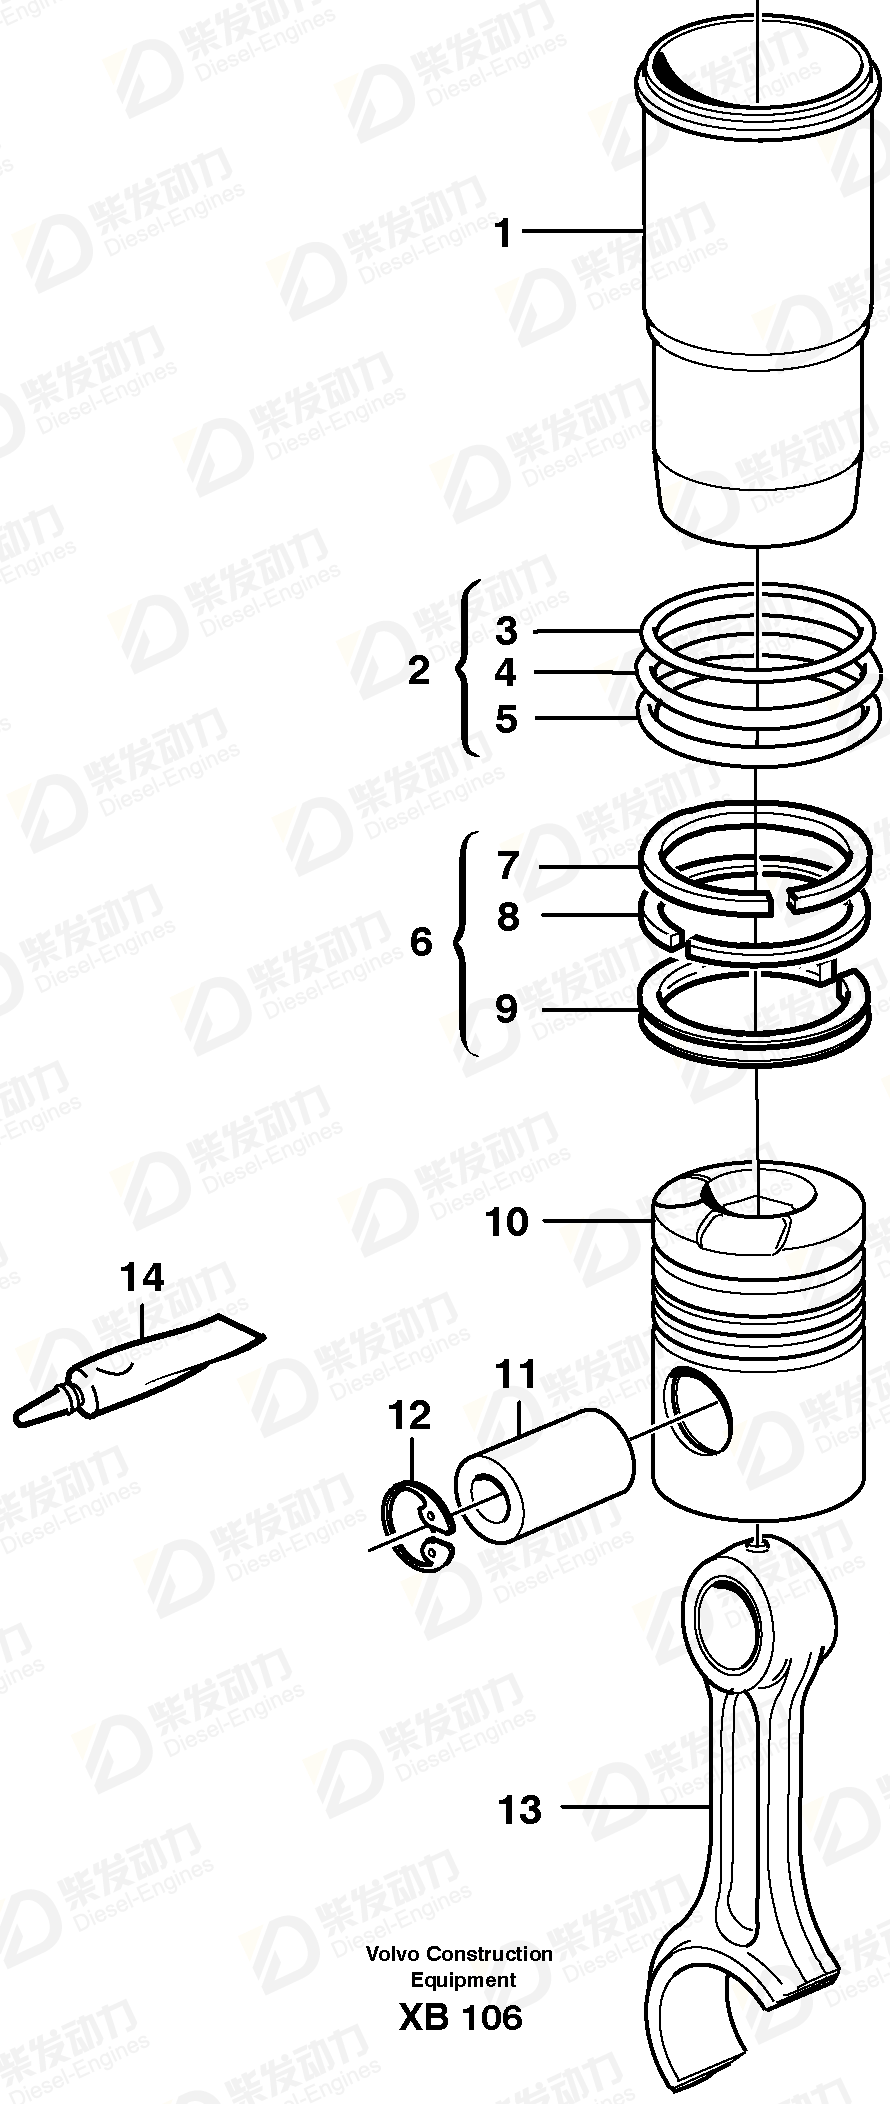 VOLVO Gudgeon pin 8194586 Drawing